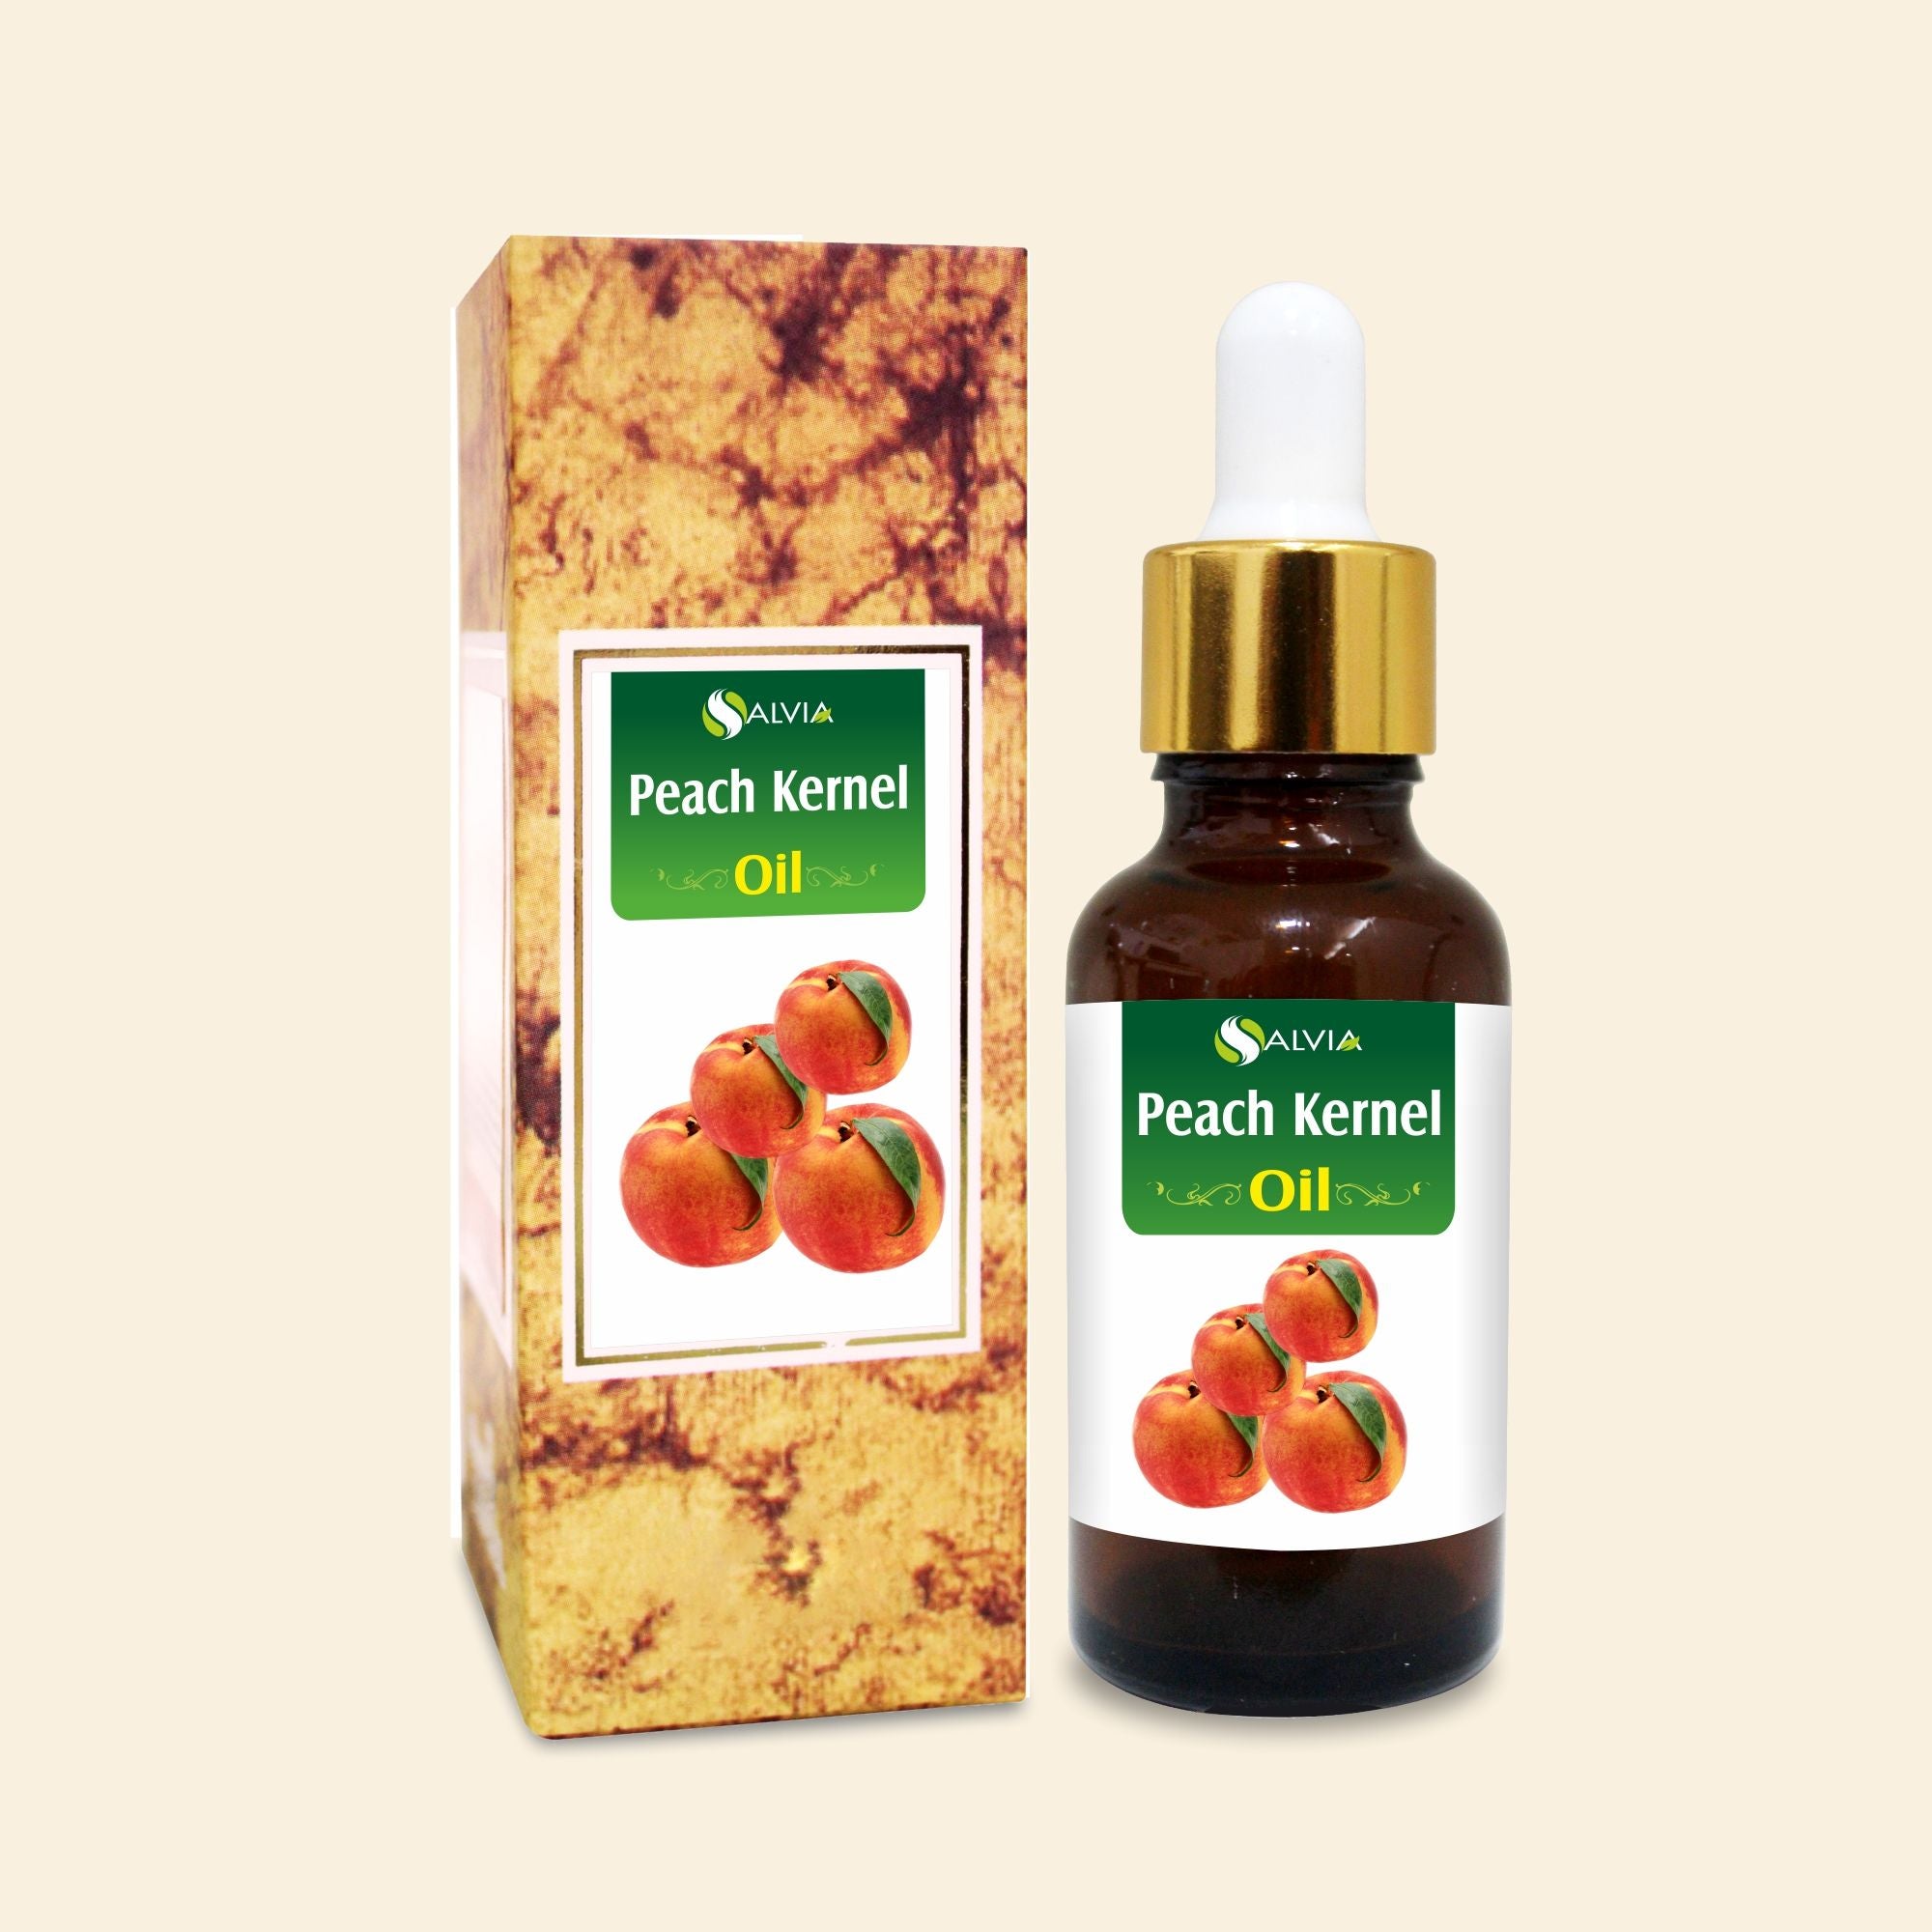 Salvia Natural Carrier Oils Peach Kernel Oil (Prunus persica) 100% Natural Pure Carrier Oil Nourishes & Moisturizes Skin, Manages Premature Aging, Promotes Healthy Hair